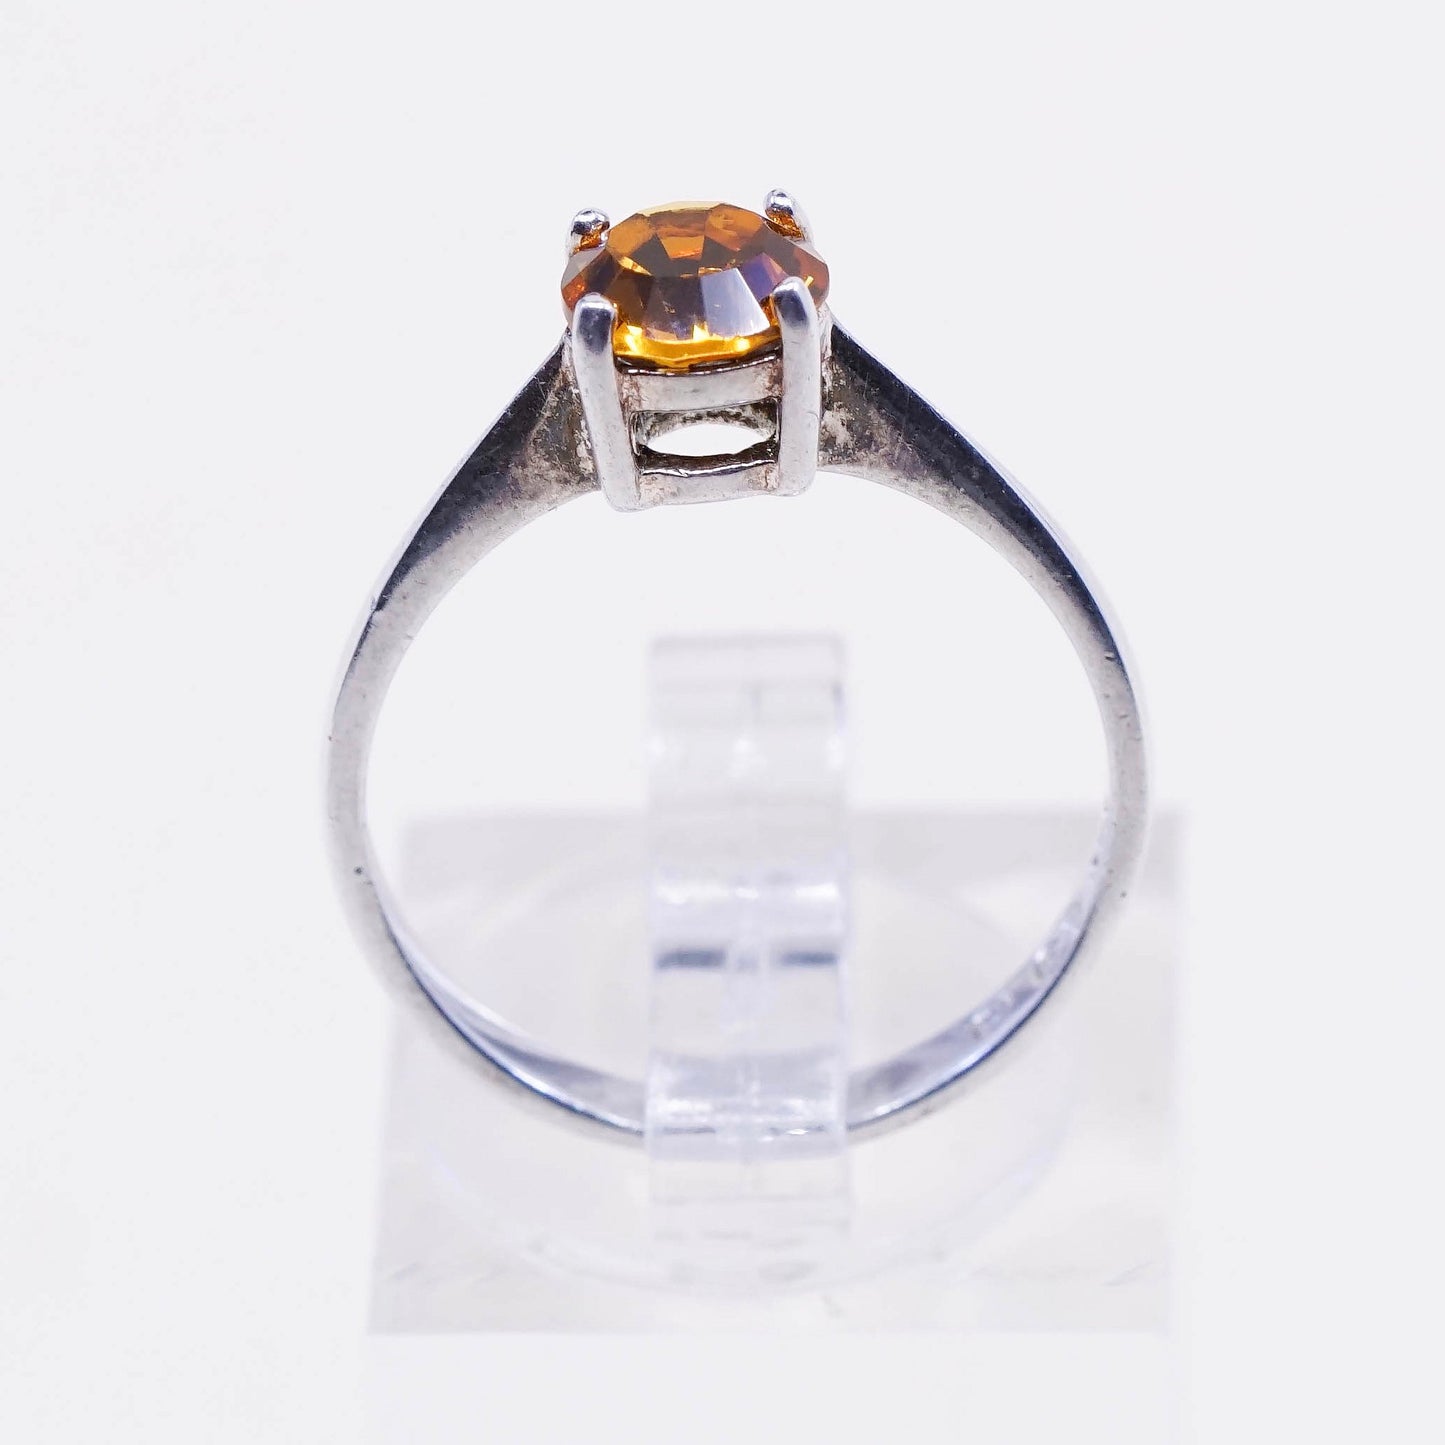 Size 7, vintage Sterling silver handmade ring, stackable 925 with citrine